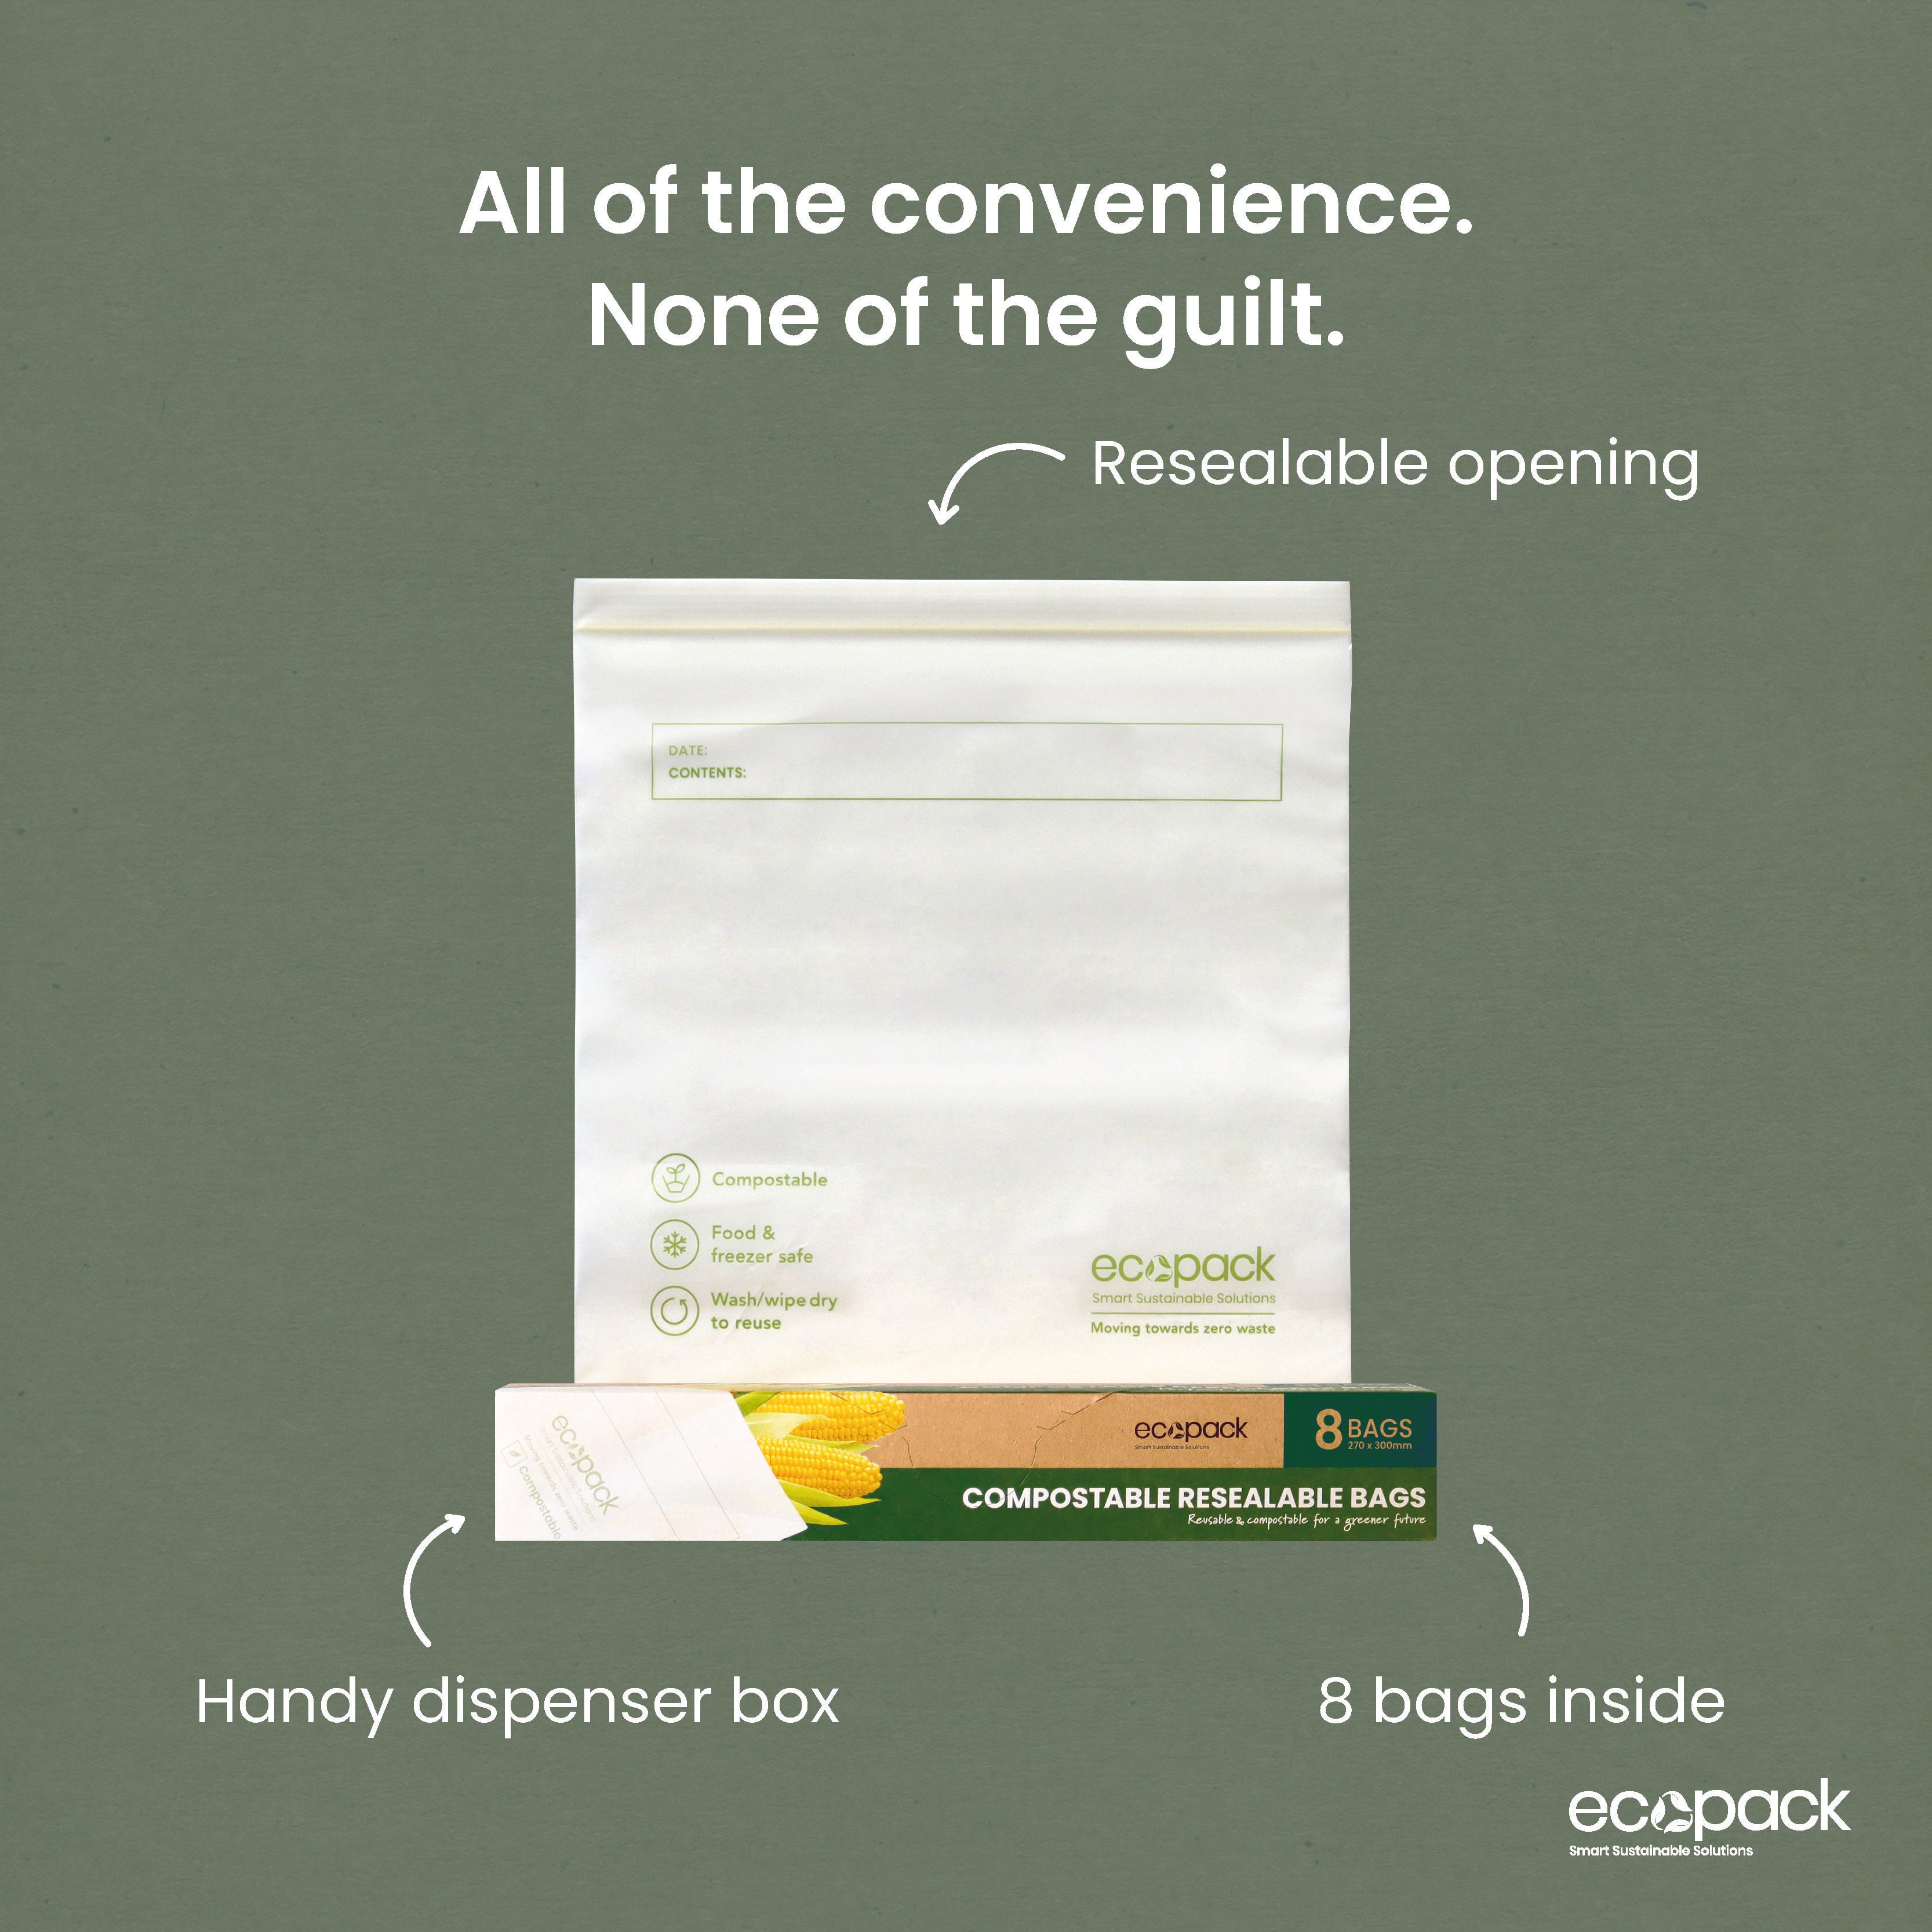 ED-2605 Compostable Resealable Storage/Freezer Bags